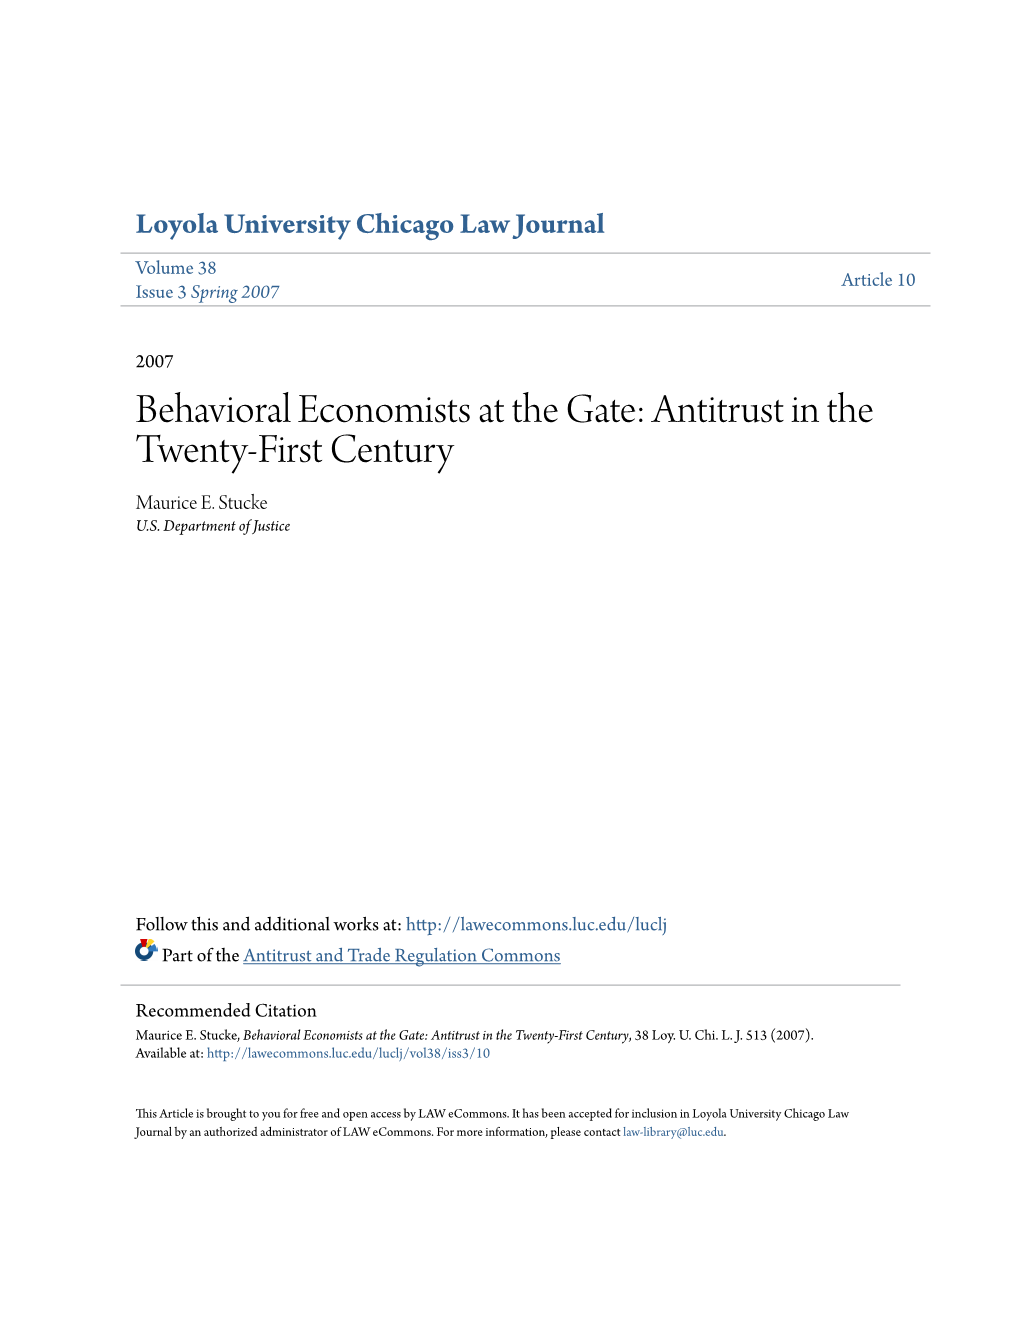 Behavioral Economists at the Gate: Antitrust in the Twenty-First Century Maurice E